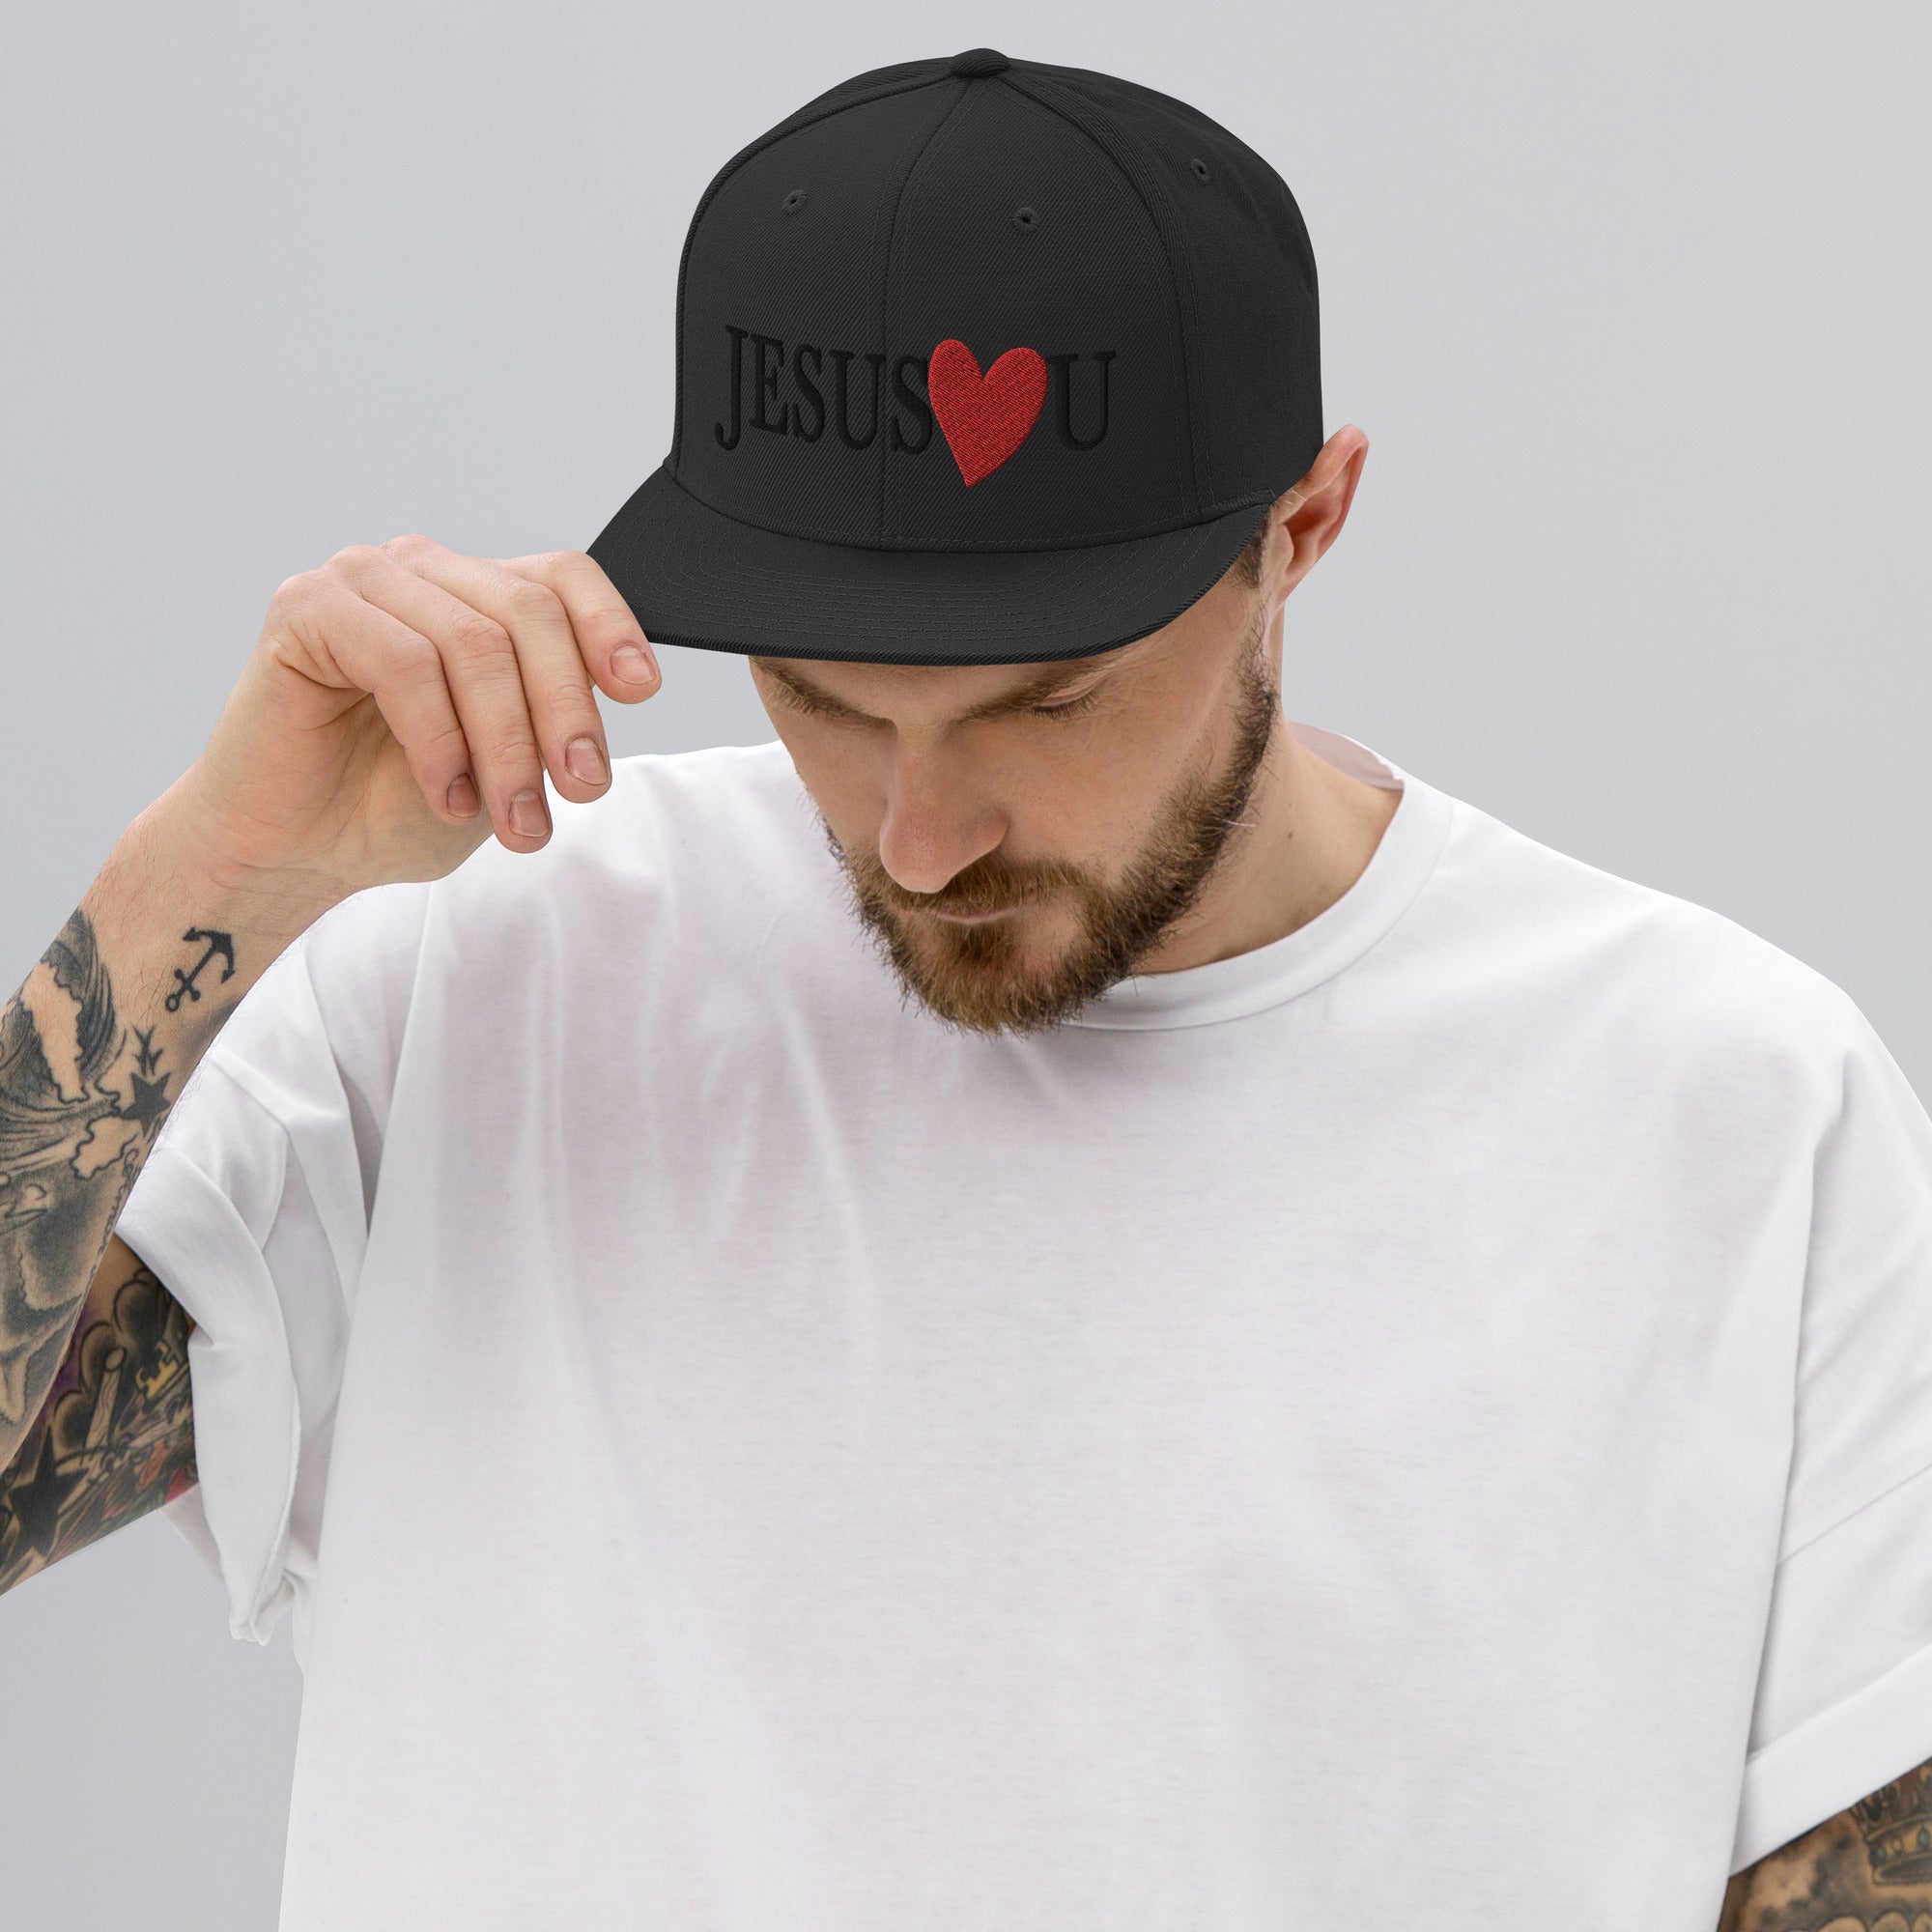 Jesus Loves You Embroidered Christian Snapback Hat